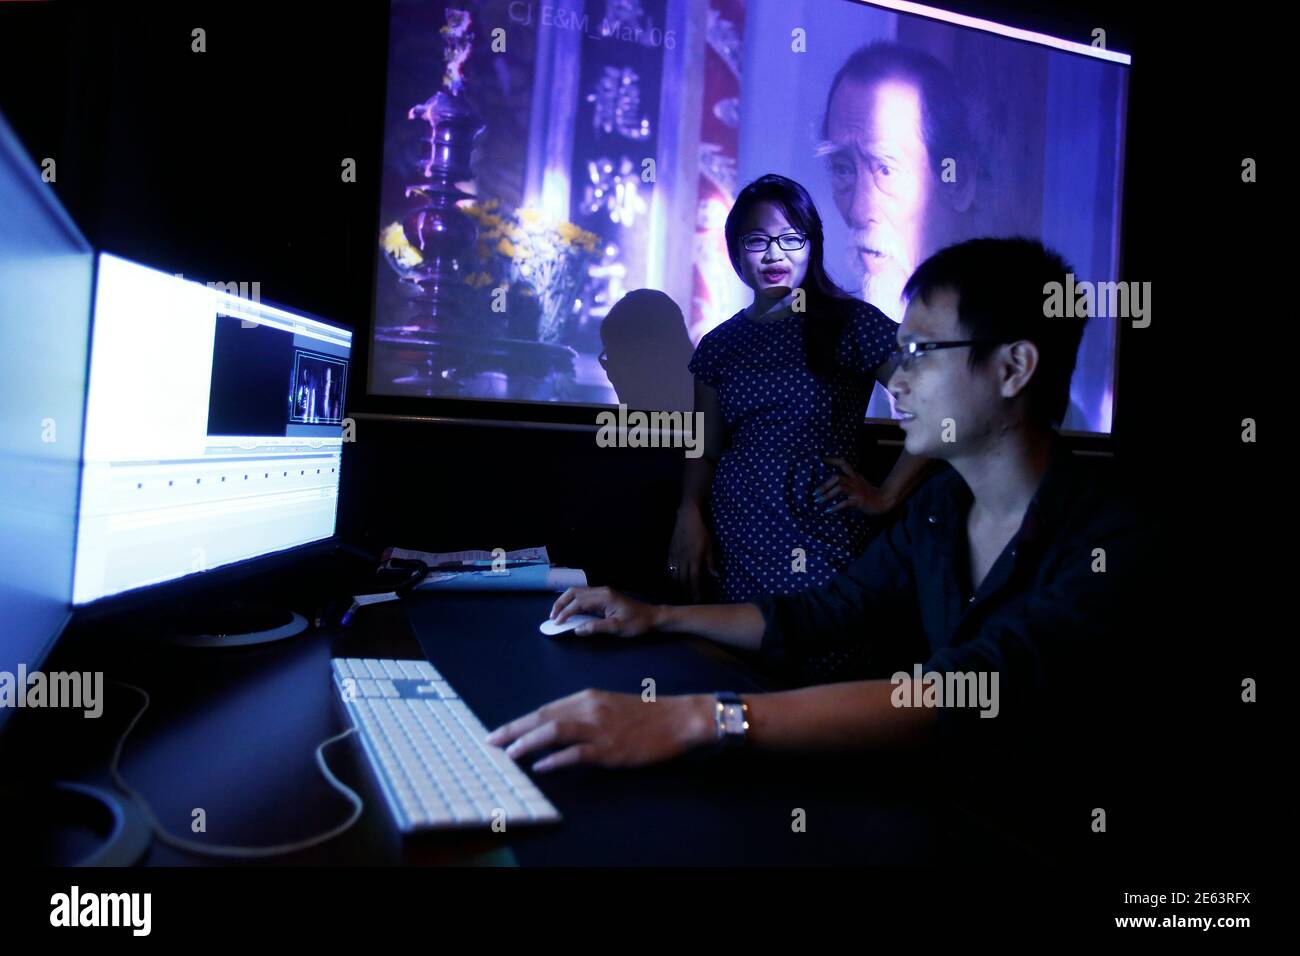 Film producer Jenni Trang Le works with an editor in her studio in Ho Chi  Minh City March 9, 2015. Jenni Trang Le has made her mark in the Vietnamese  film industry,